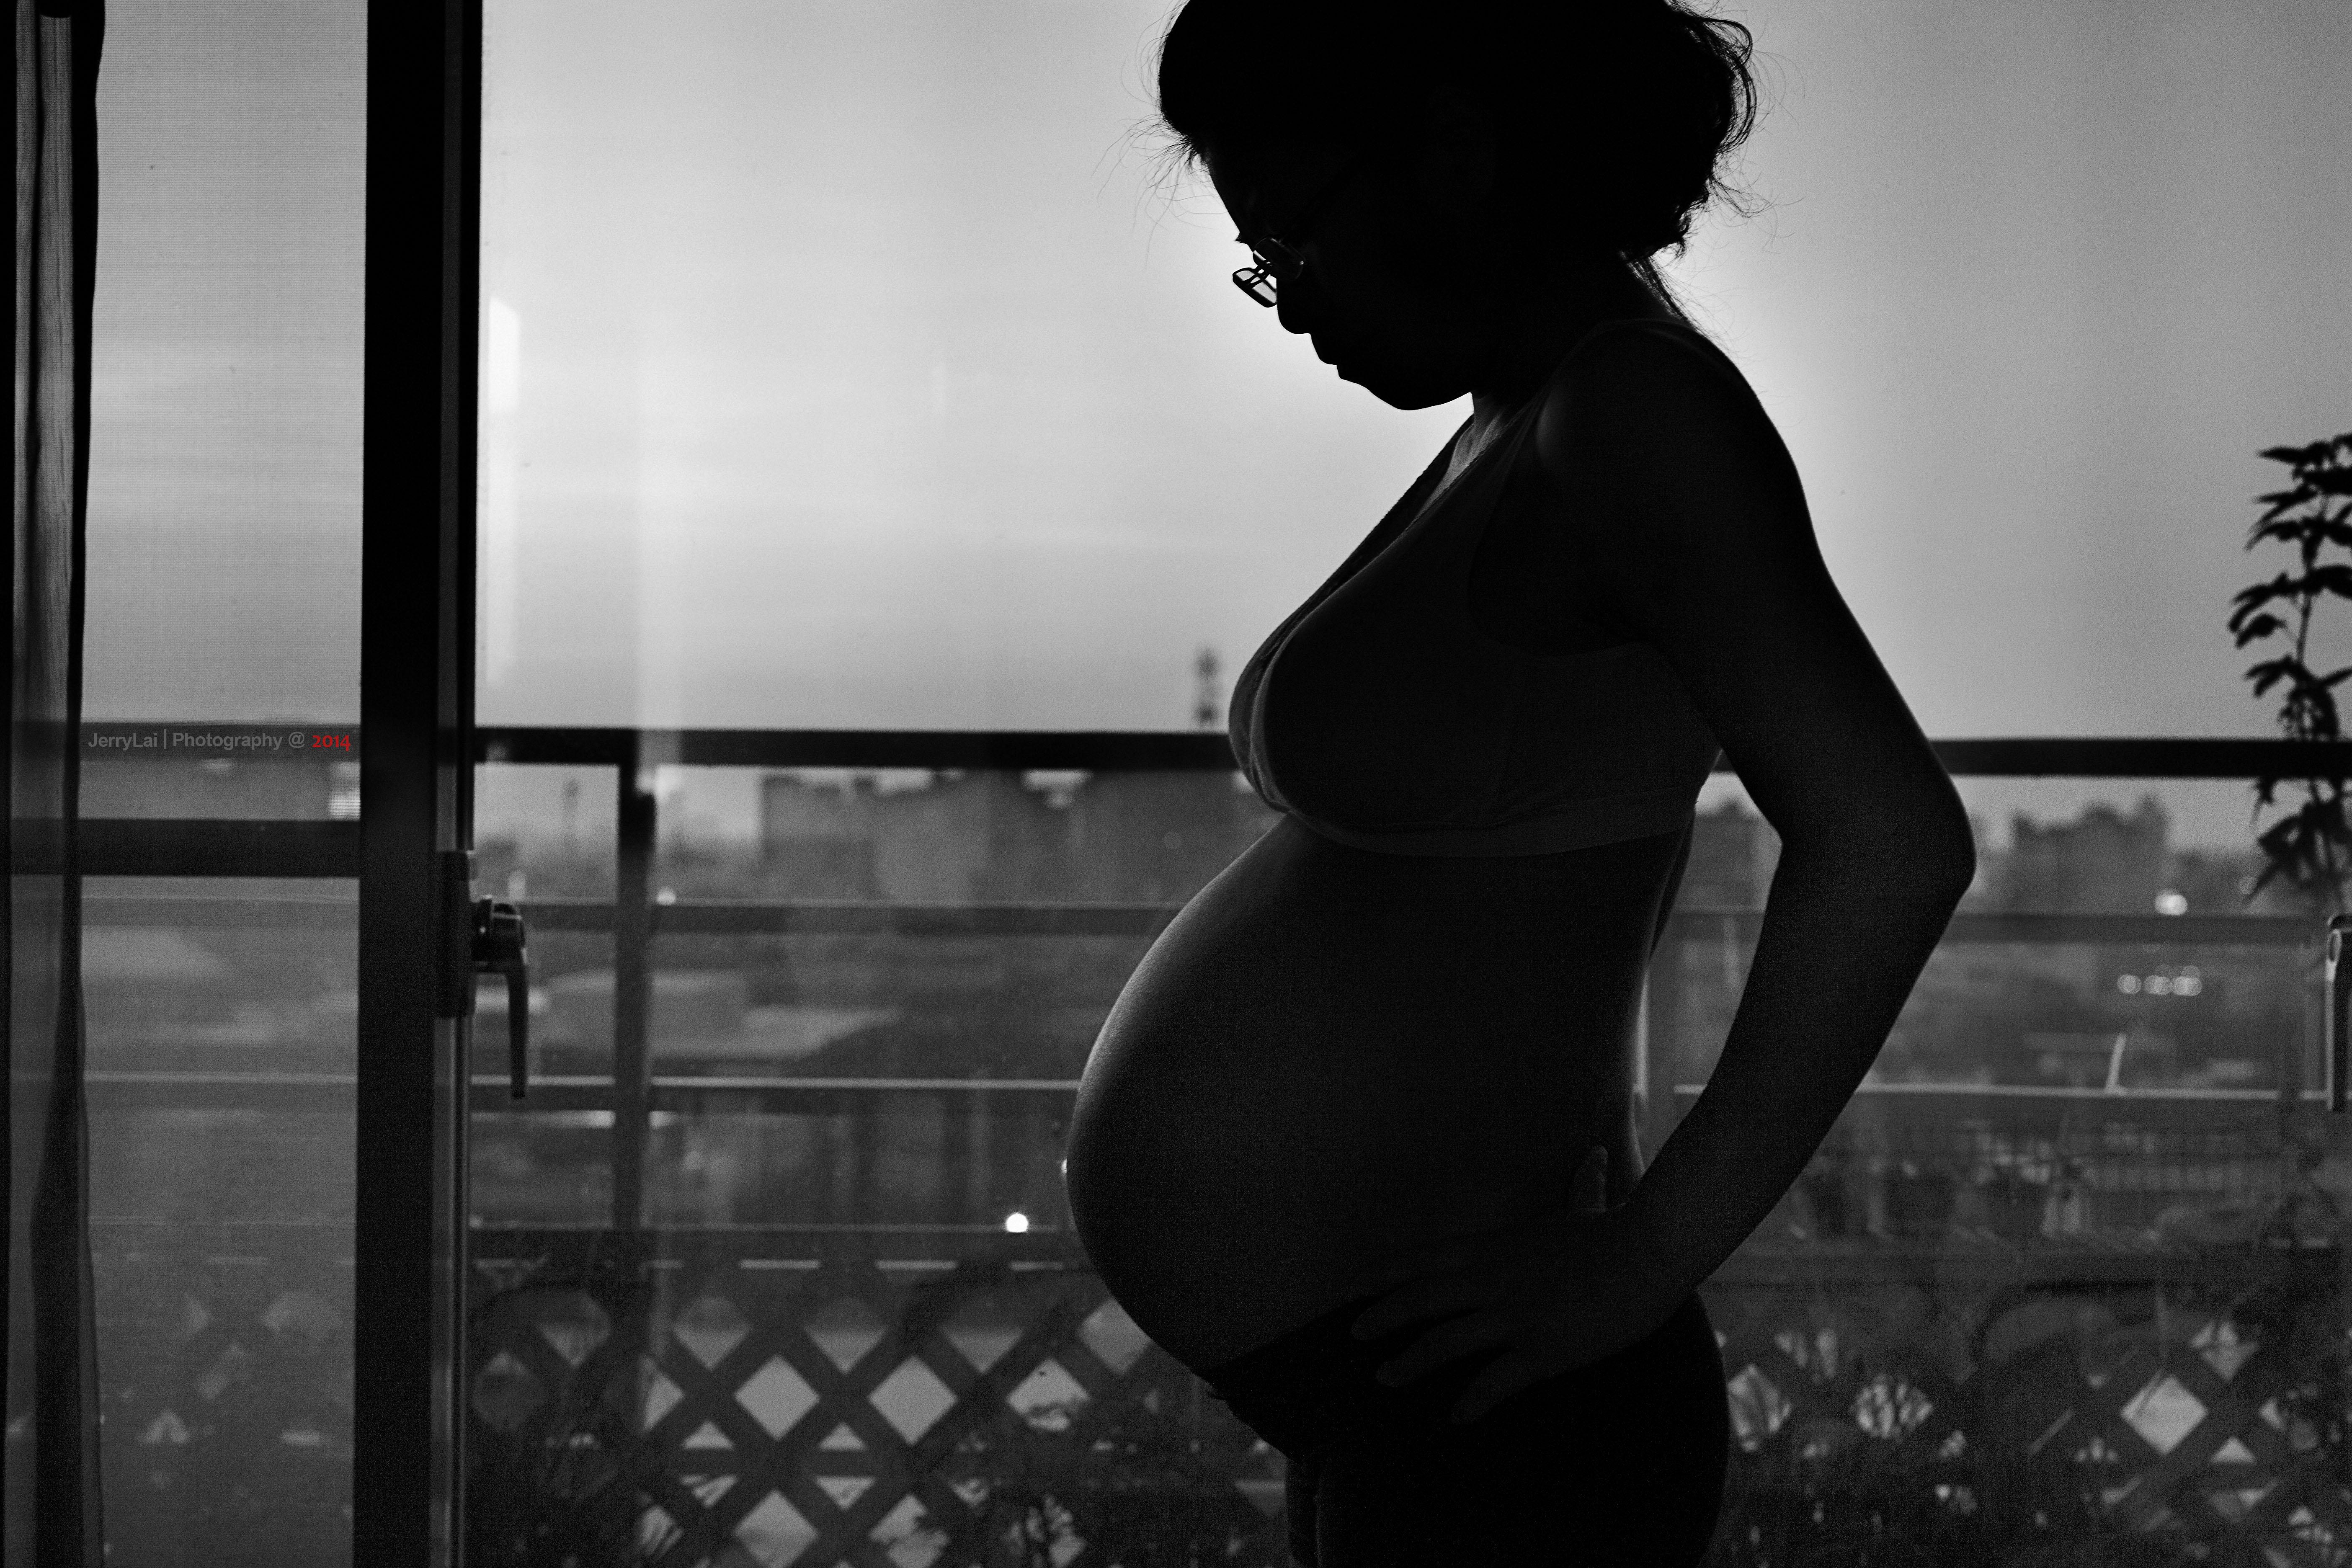 A black and white silhouette of a pregnant woman. (Jerry Lai via Flickr)